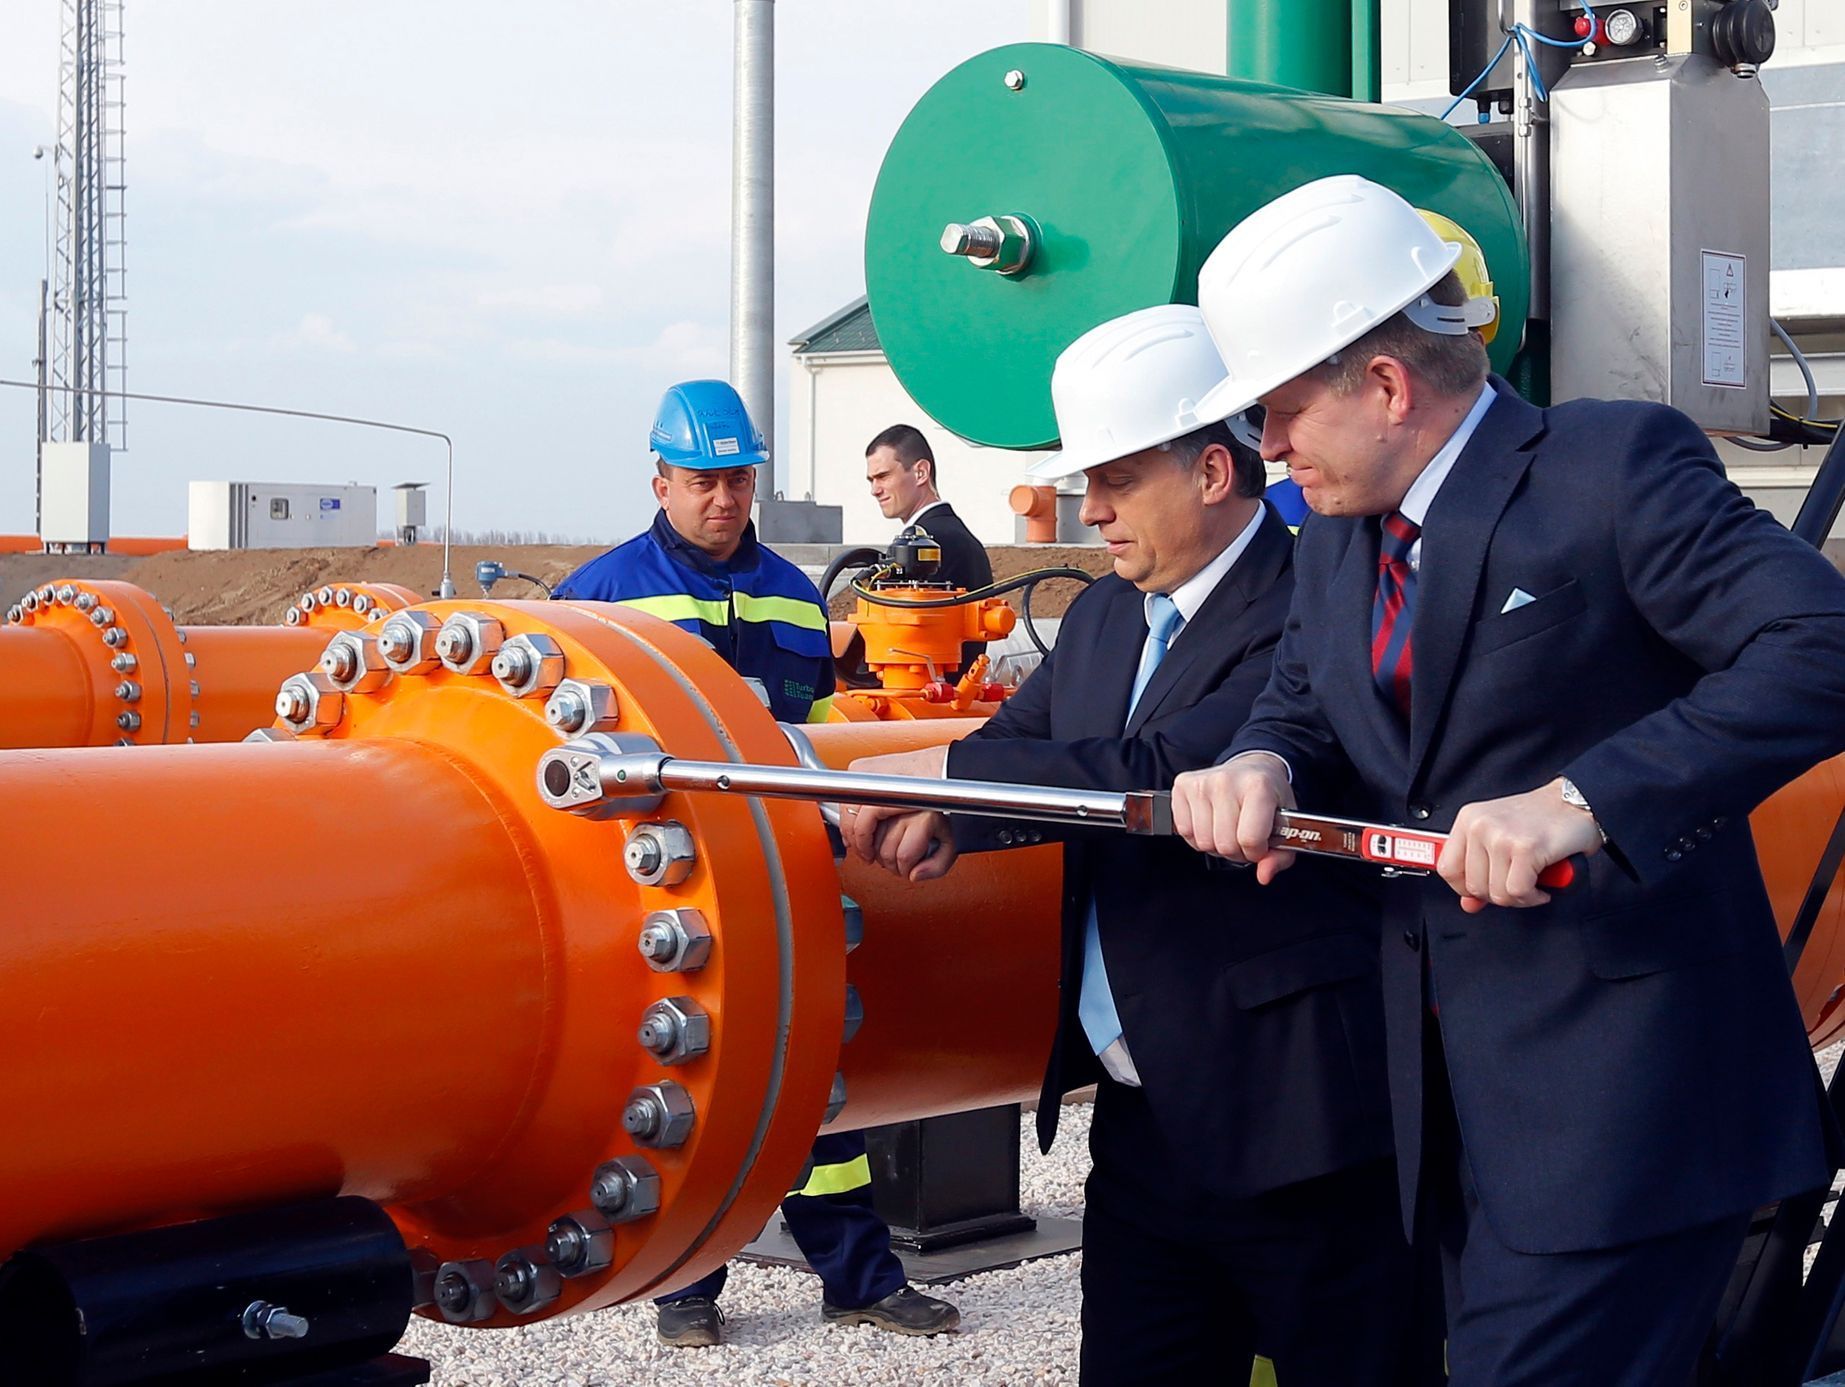 Viktor Orban and Robert Fico tighten a screw during the inauguration of the interconnection of the Hungarian and Slovak natural gas network in Szada